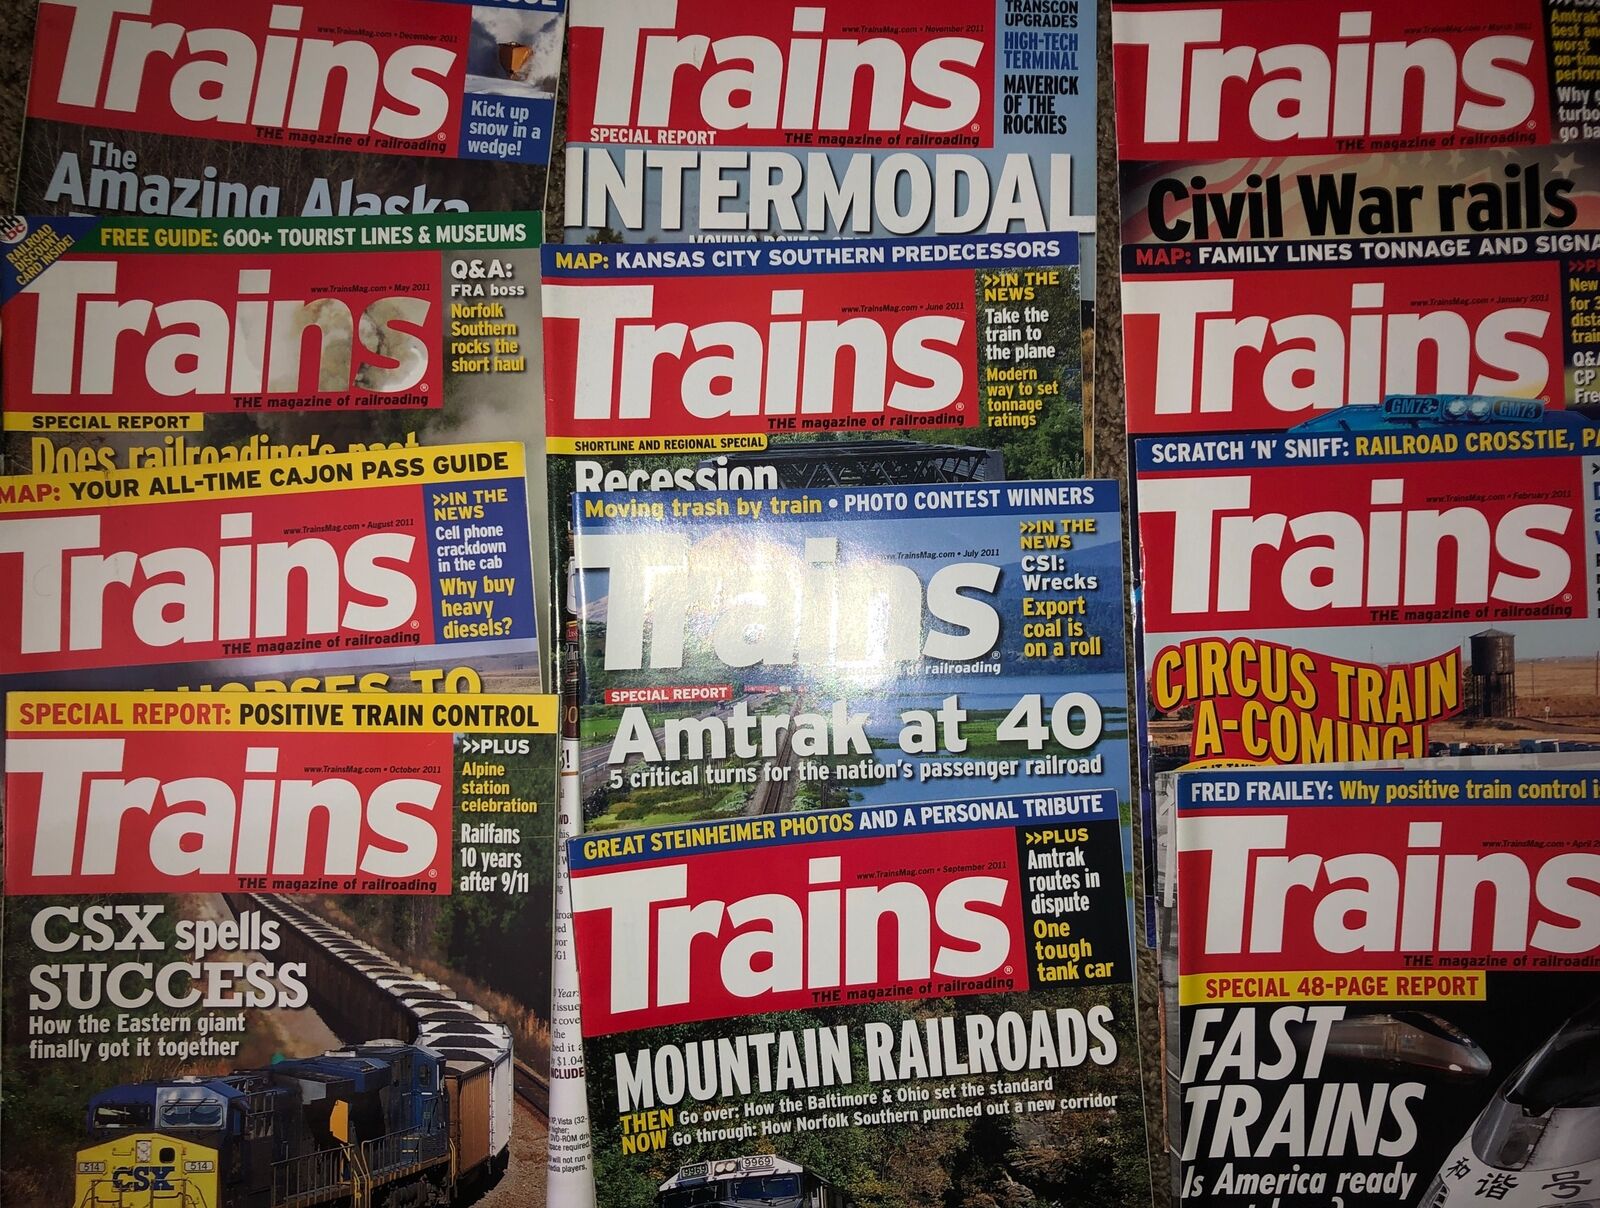 Trains 2011 Magazine 12 Issues January February March April May June July Aug